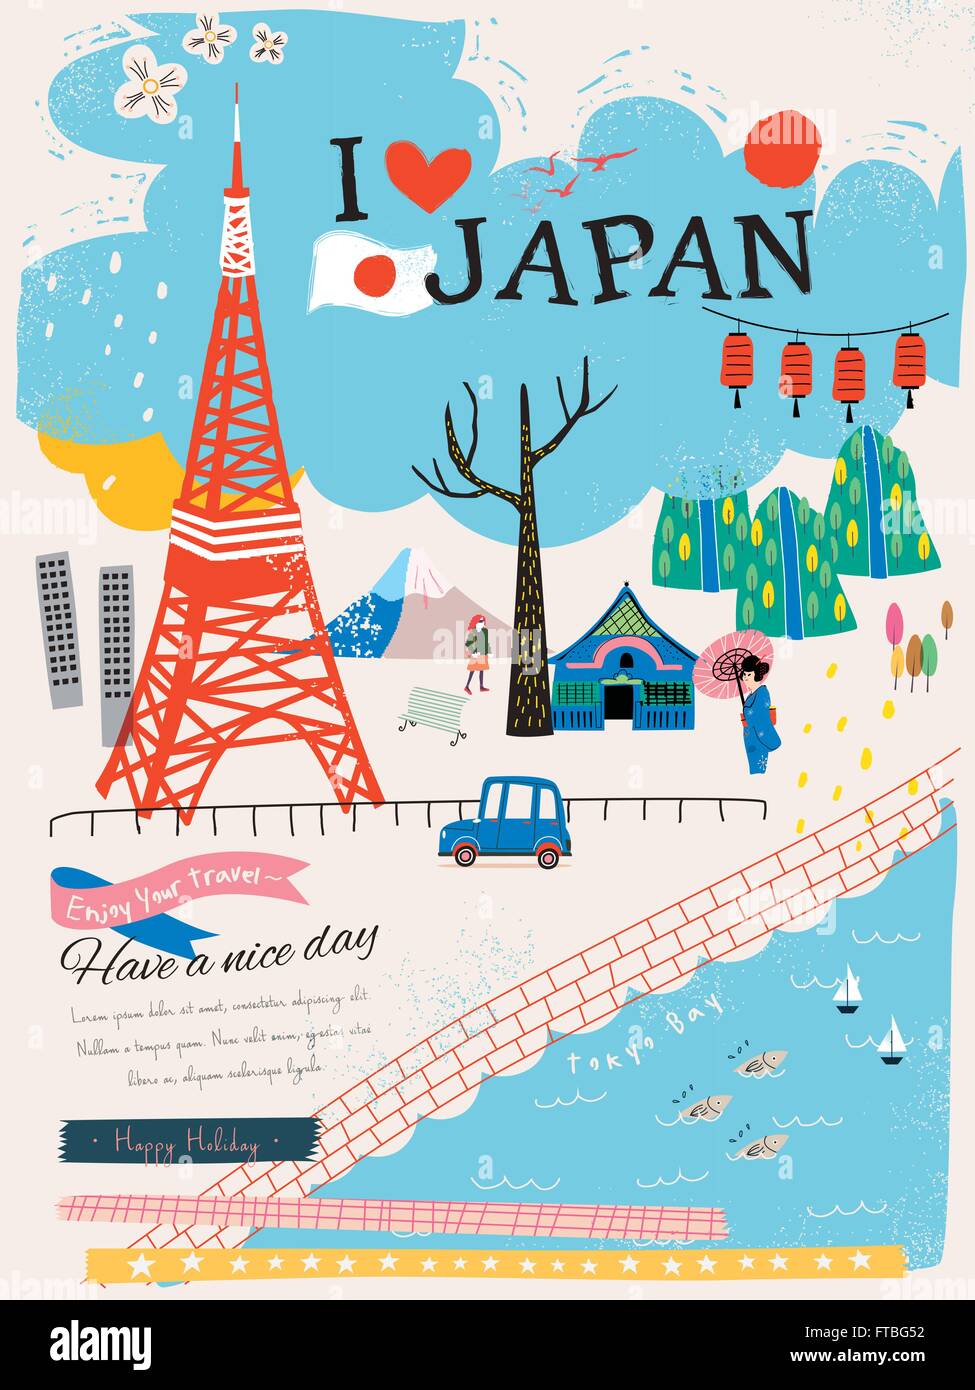 lovely Japan impression poster with tokyo tower Stock Vector